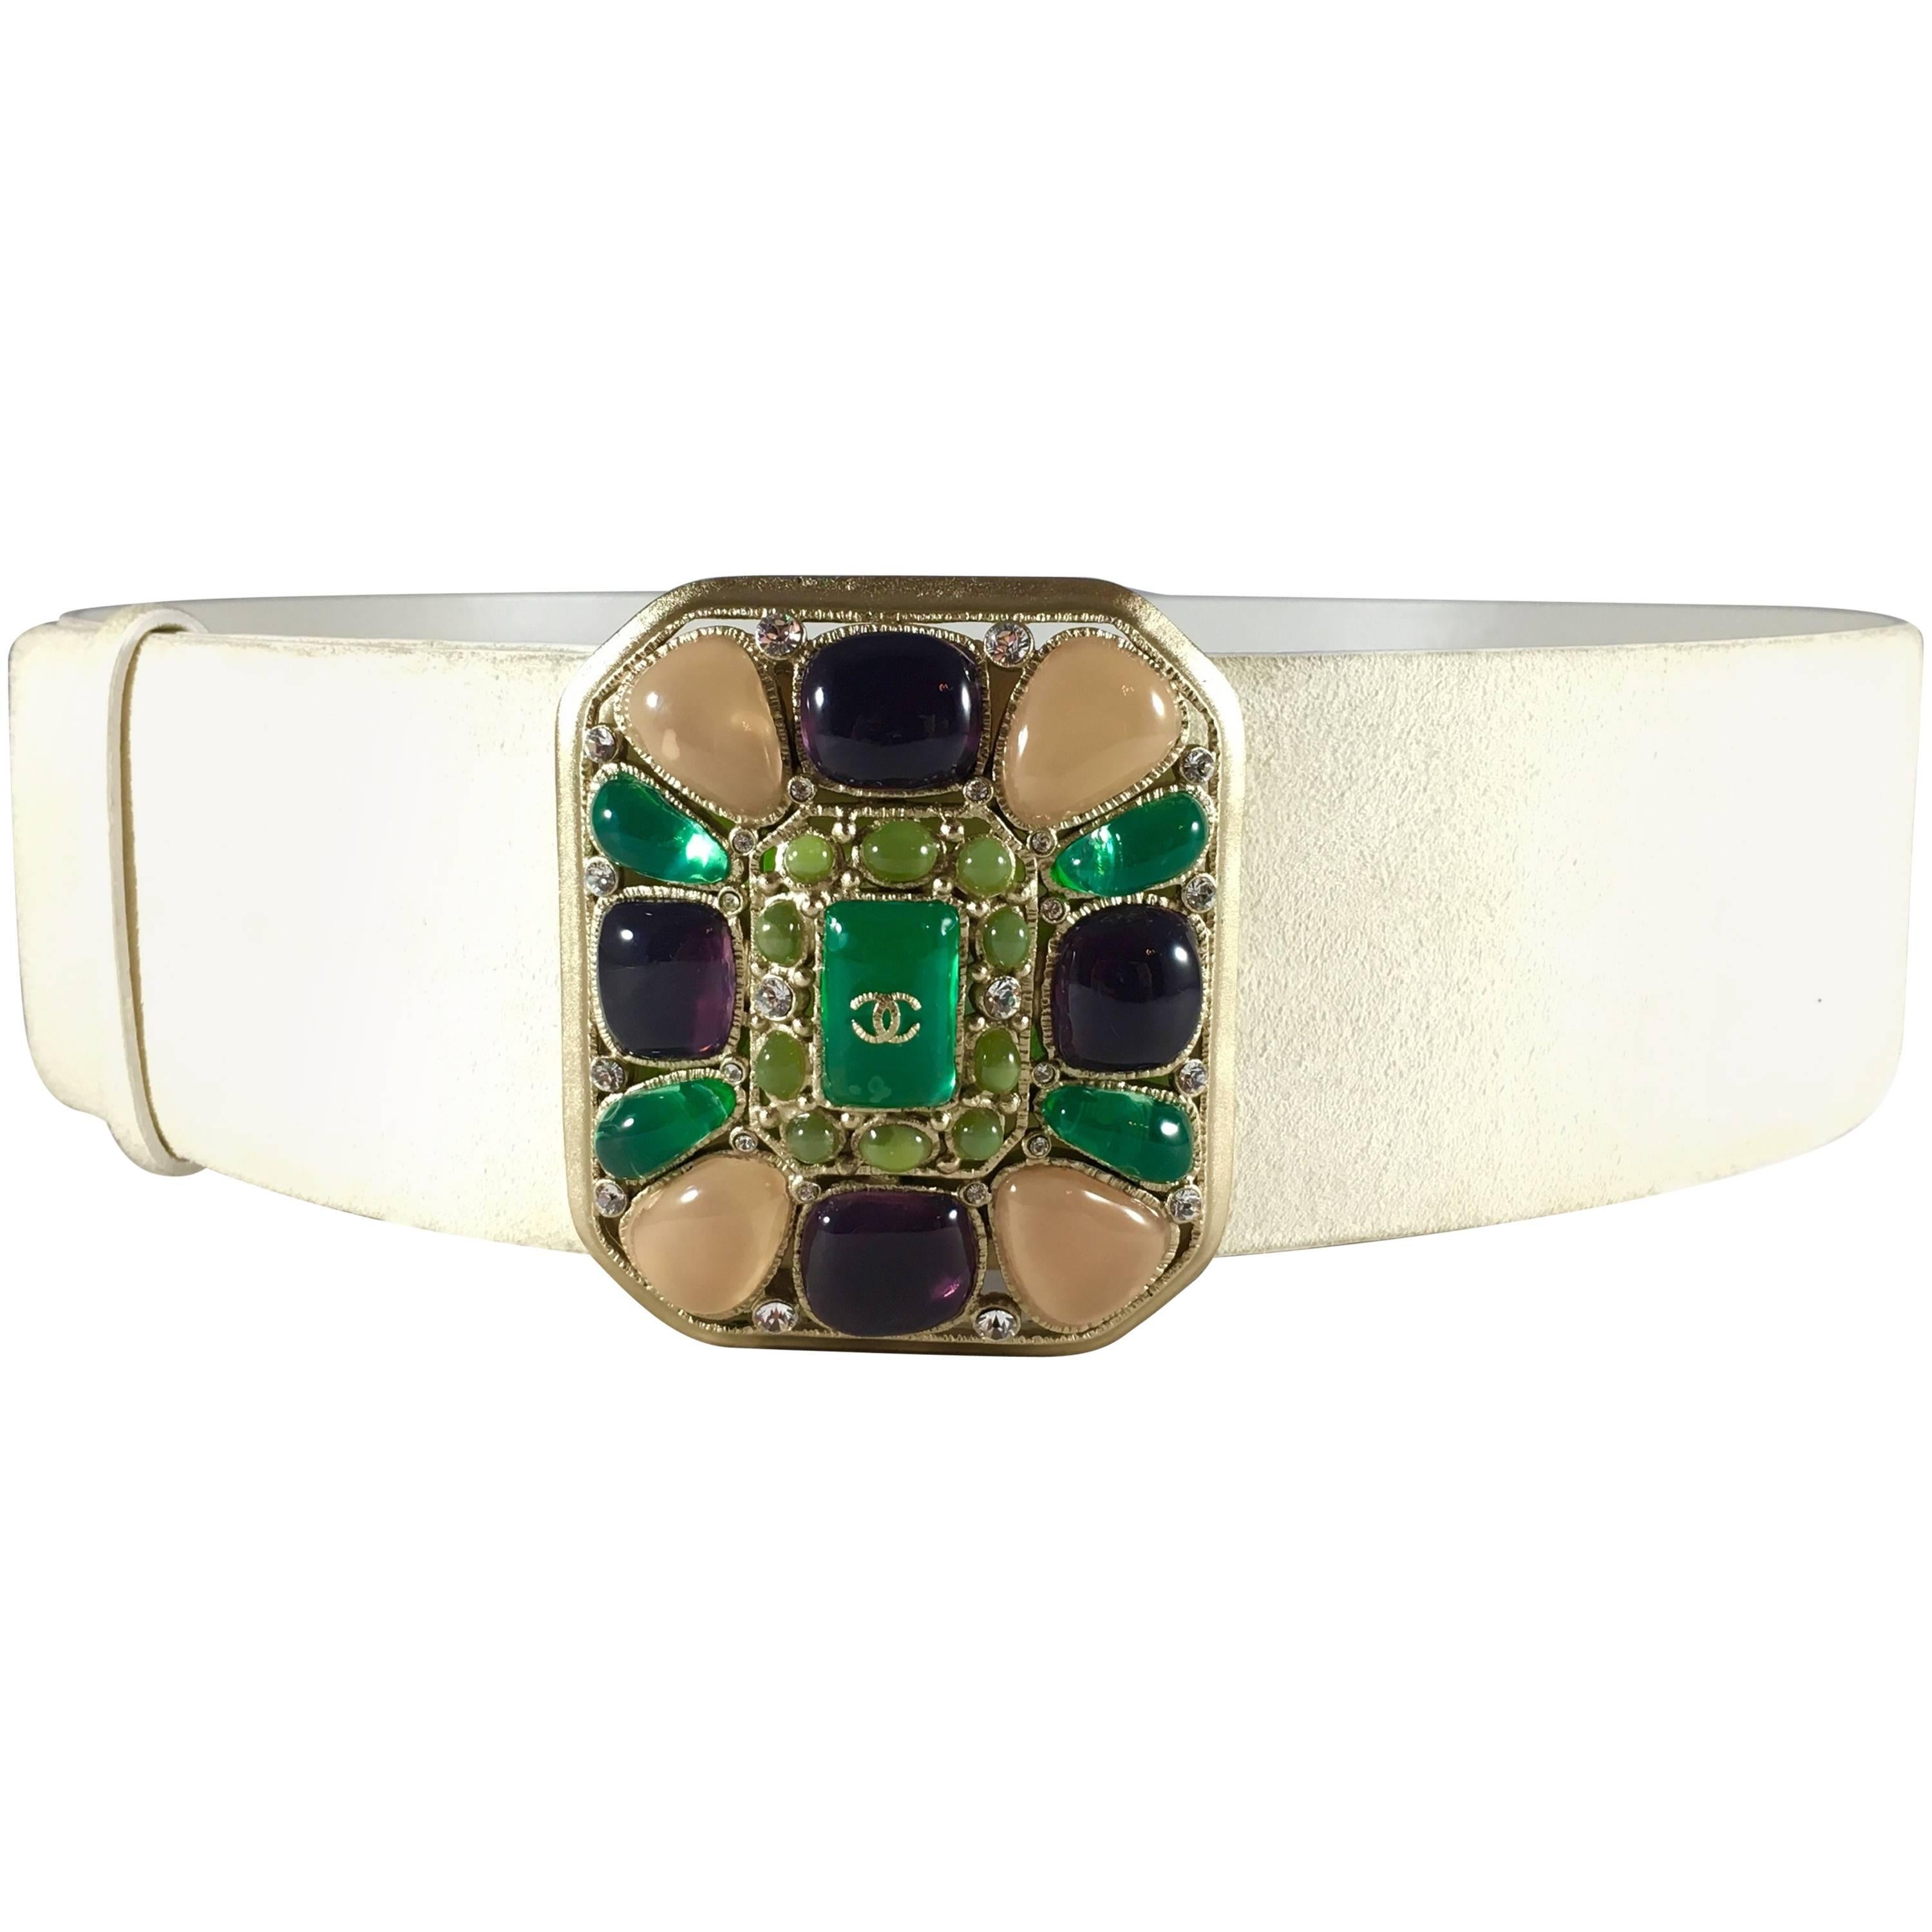 Chanel White Suede Belt With Purple Peach and Green Gripoix Jewel Buckle, Sz 38